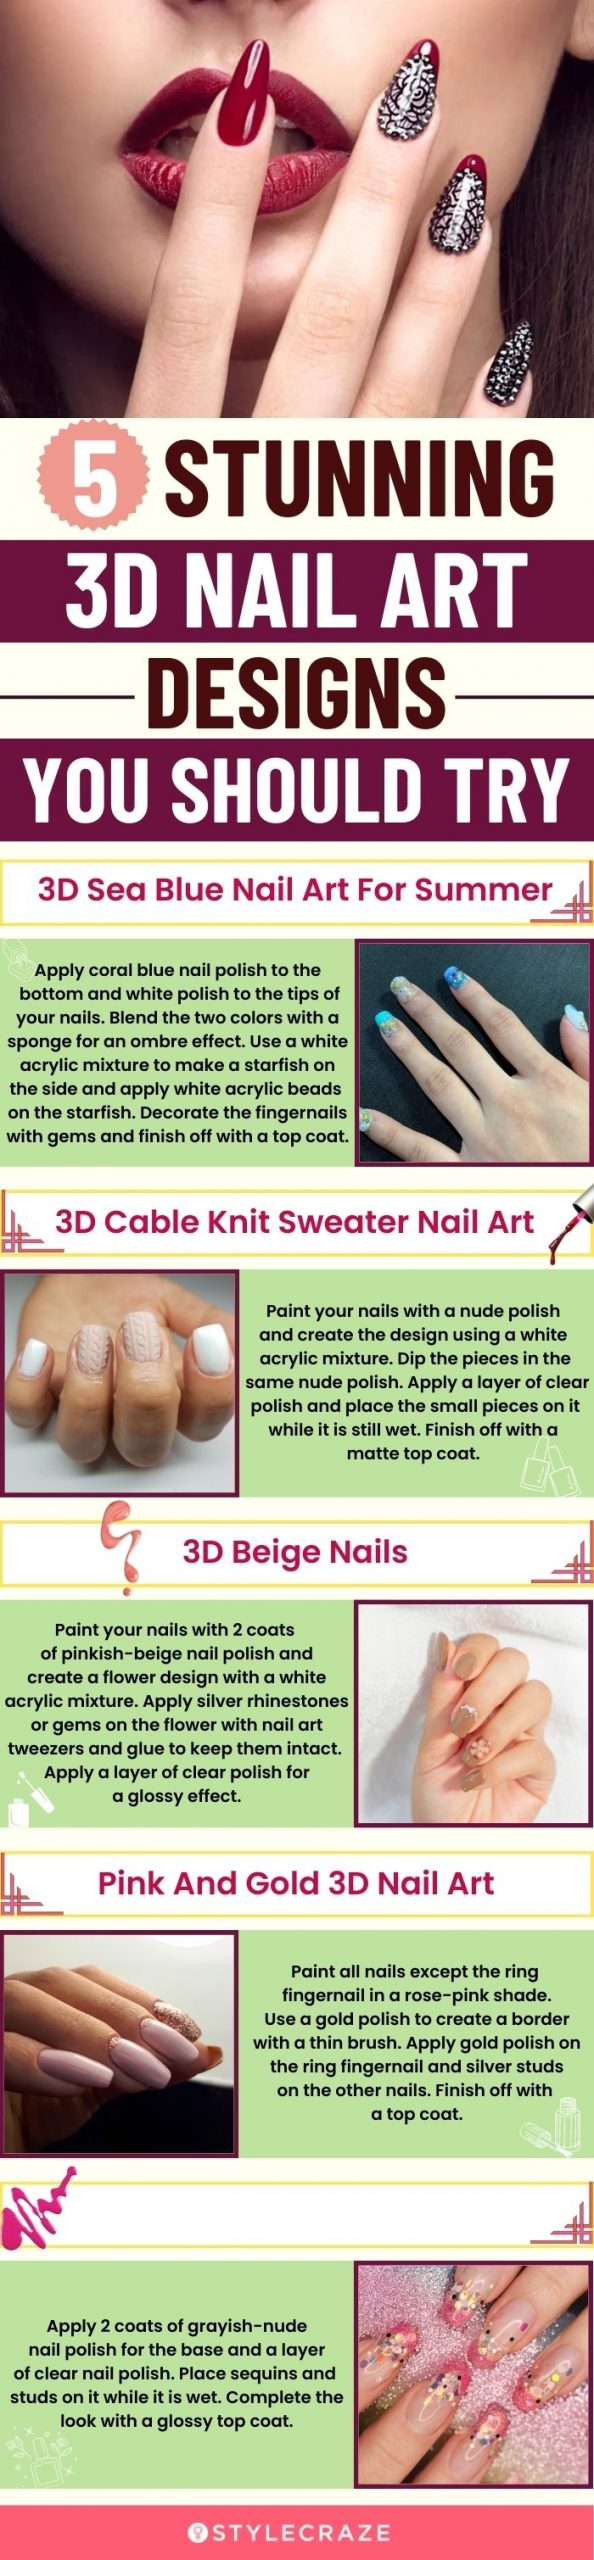 5 stunning 3d nail art designs you should try (infographic)